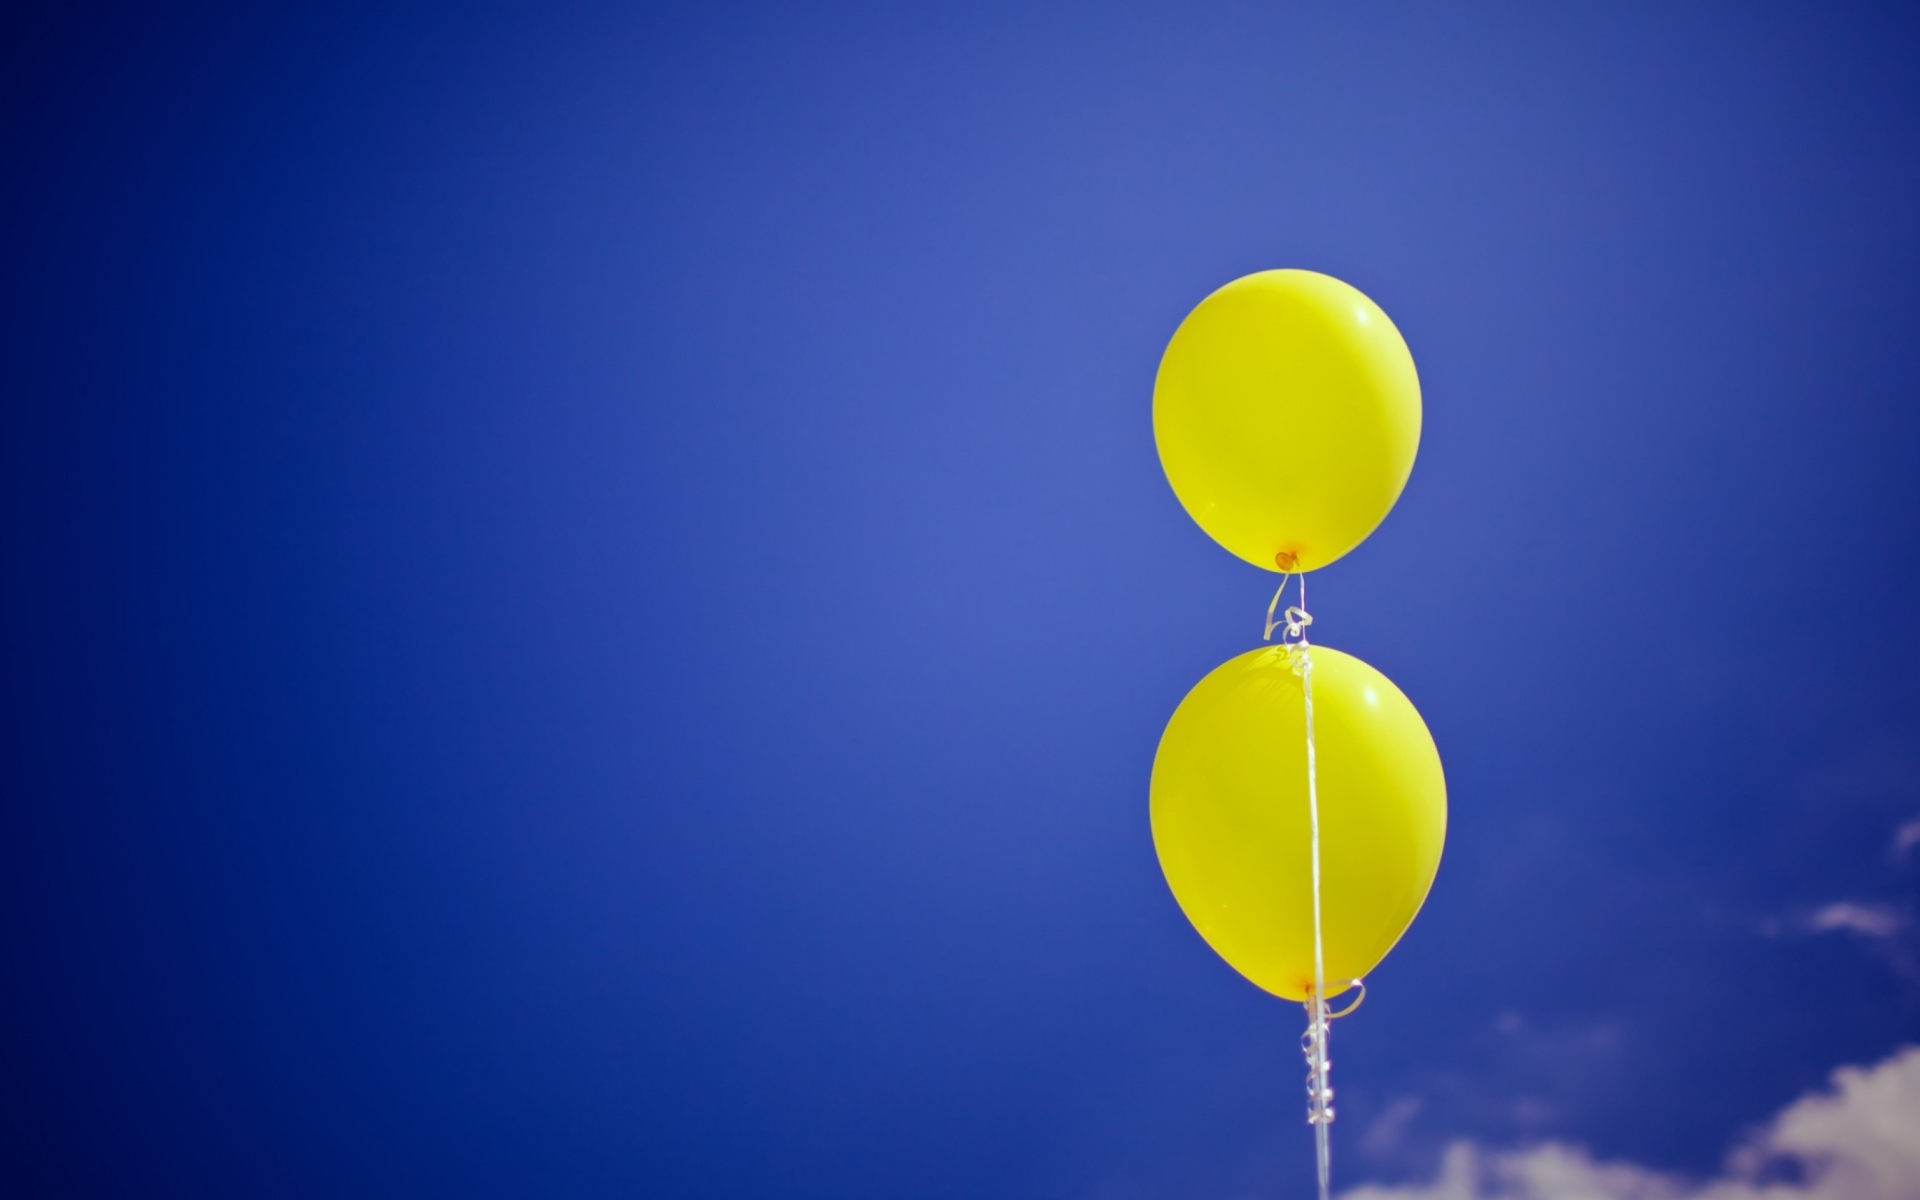 Yellow Balloons In The Blue Sky wallpaper 1920x1200